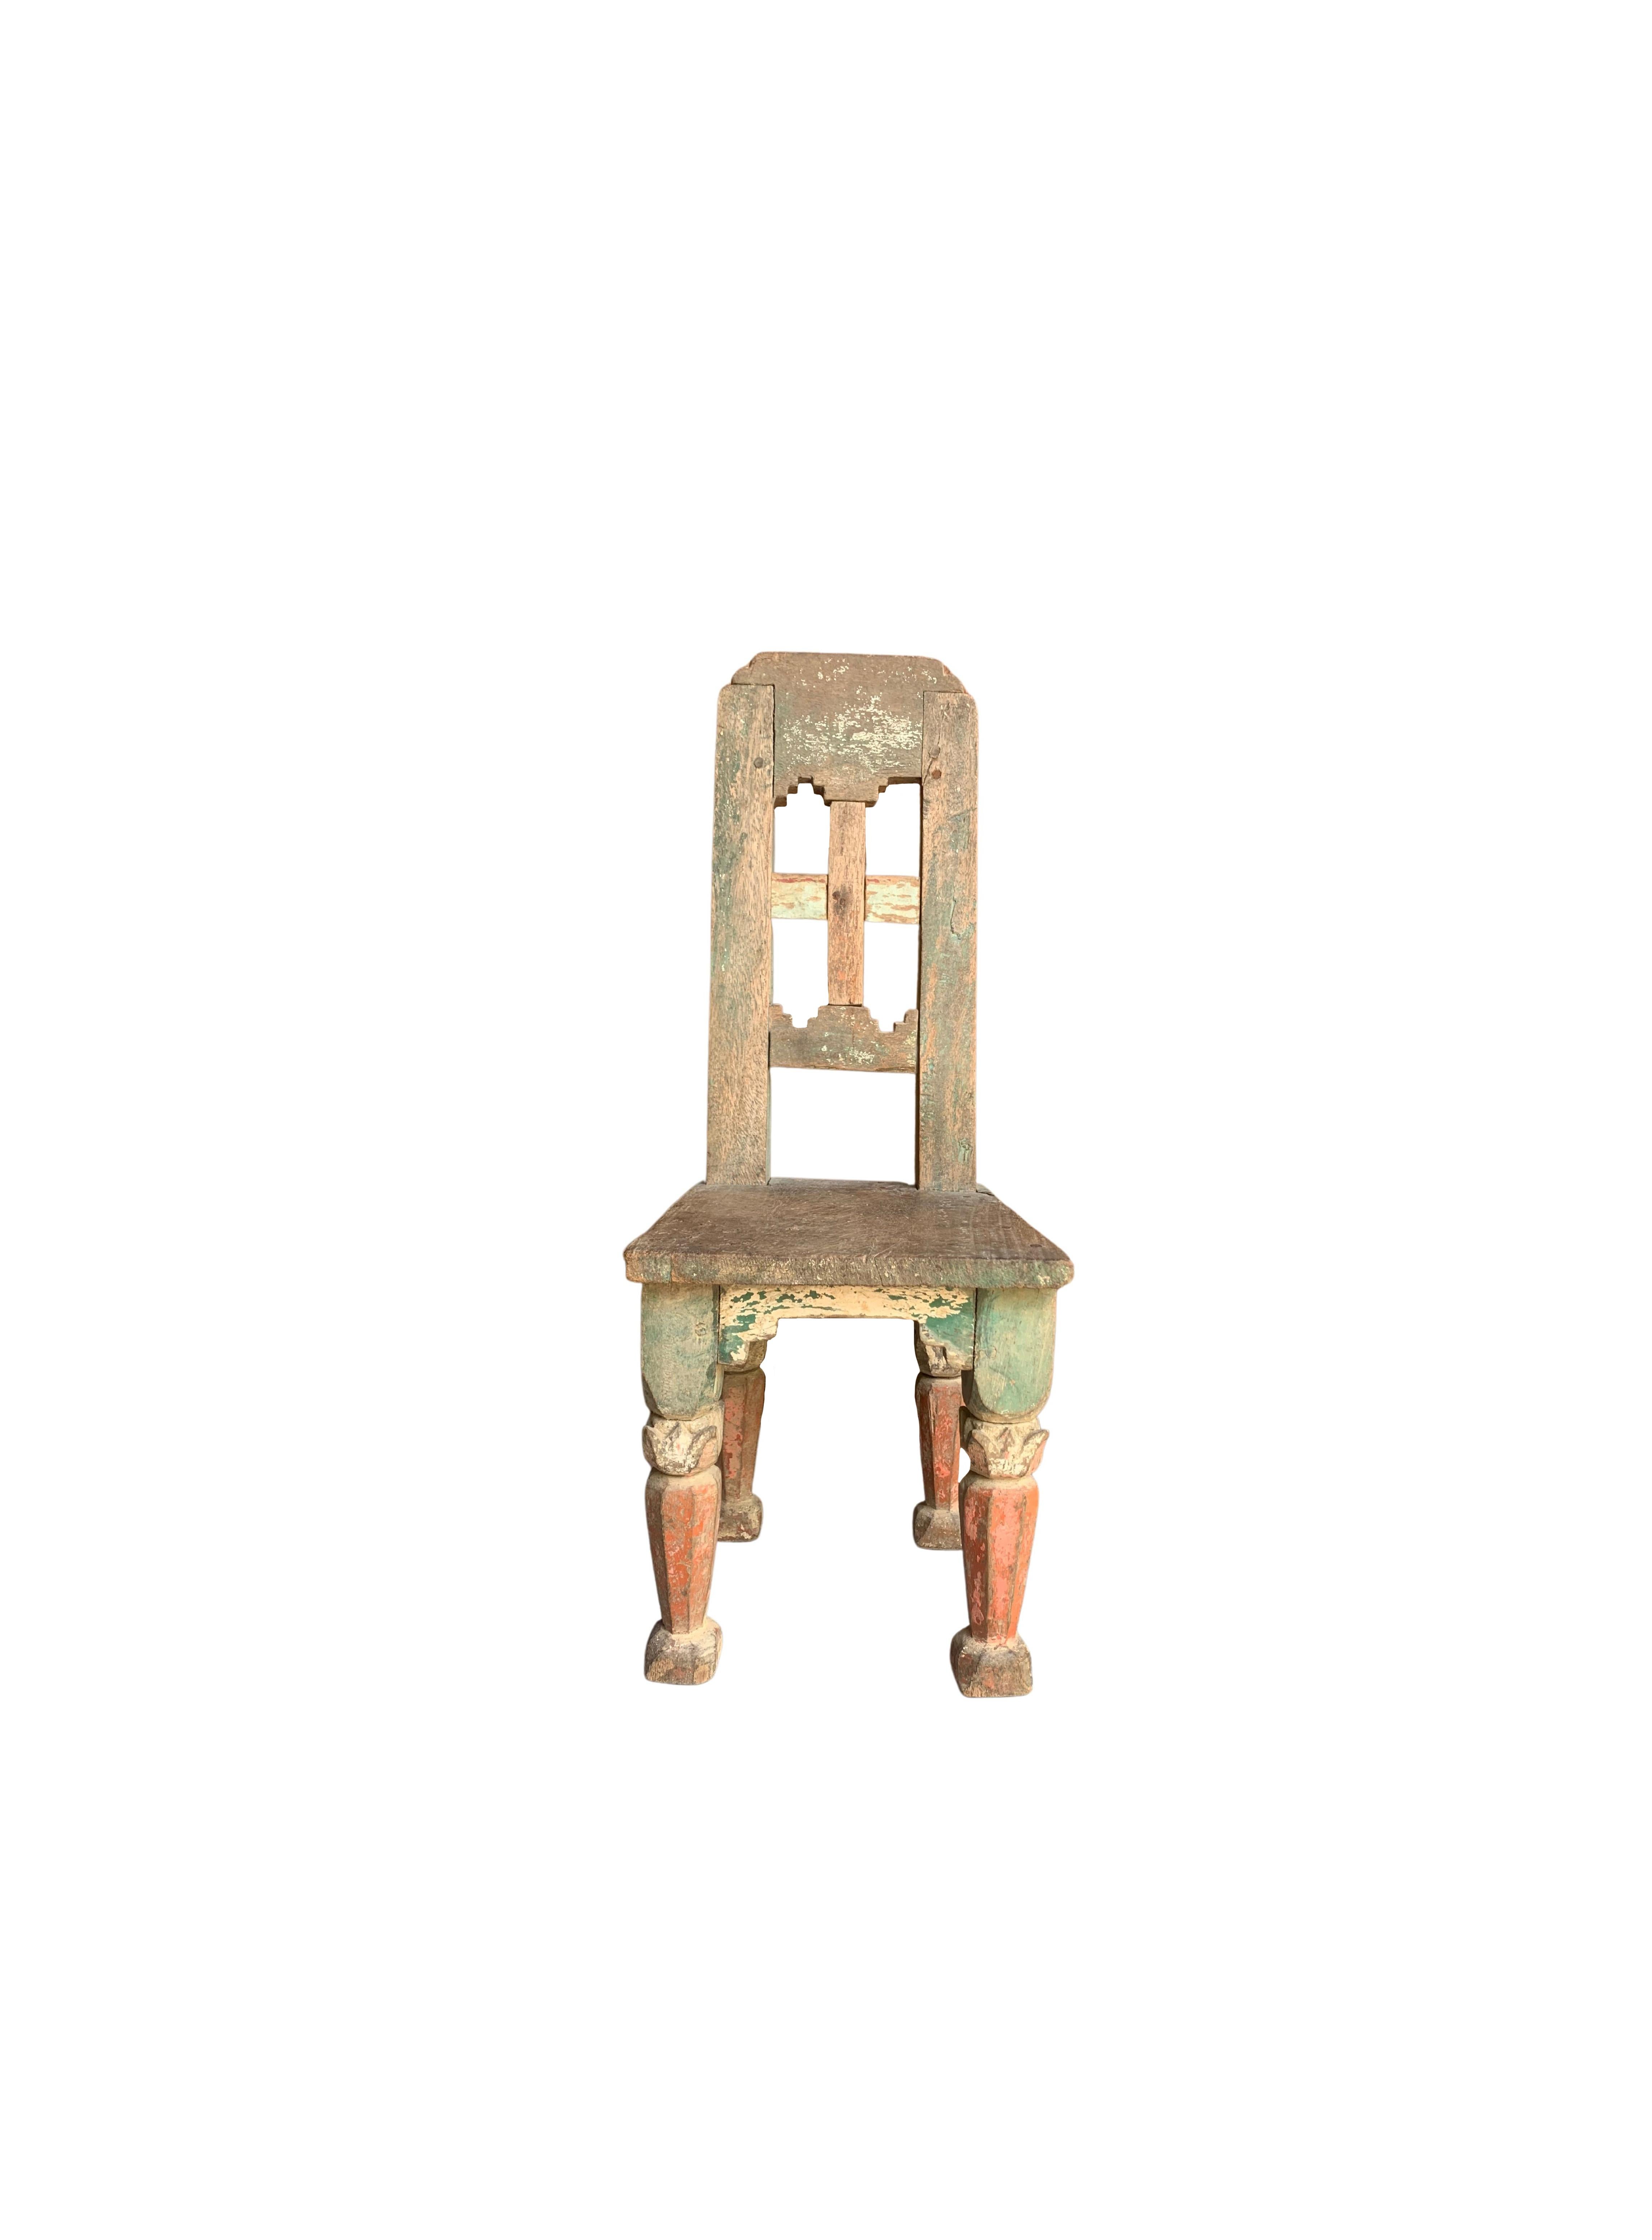 Mini Chairs such as these were once abundant amongst Indonesian tobacco plantations for workers to sit and cut cultivated tobacco. The present mini chair is an elegant example of such a chair, crafted from teak wood and featuring a red & green